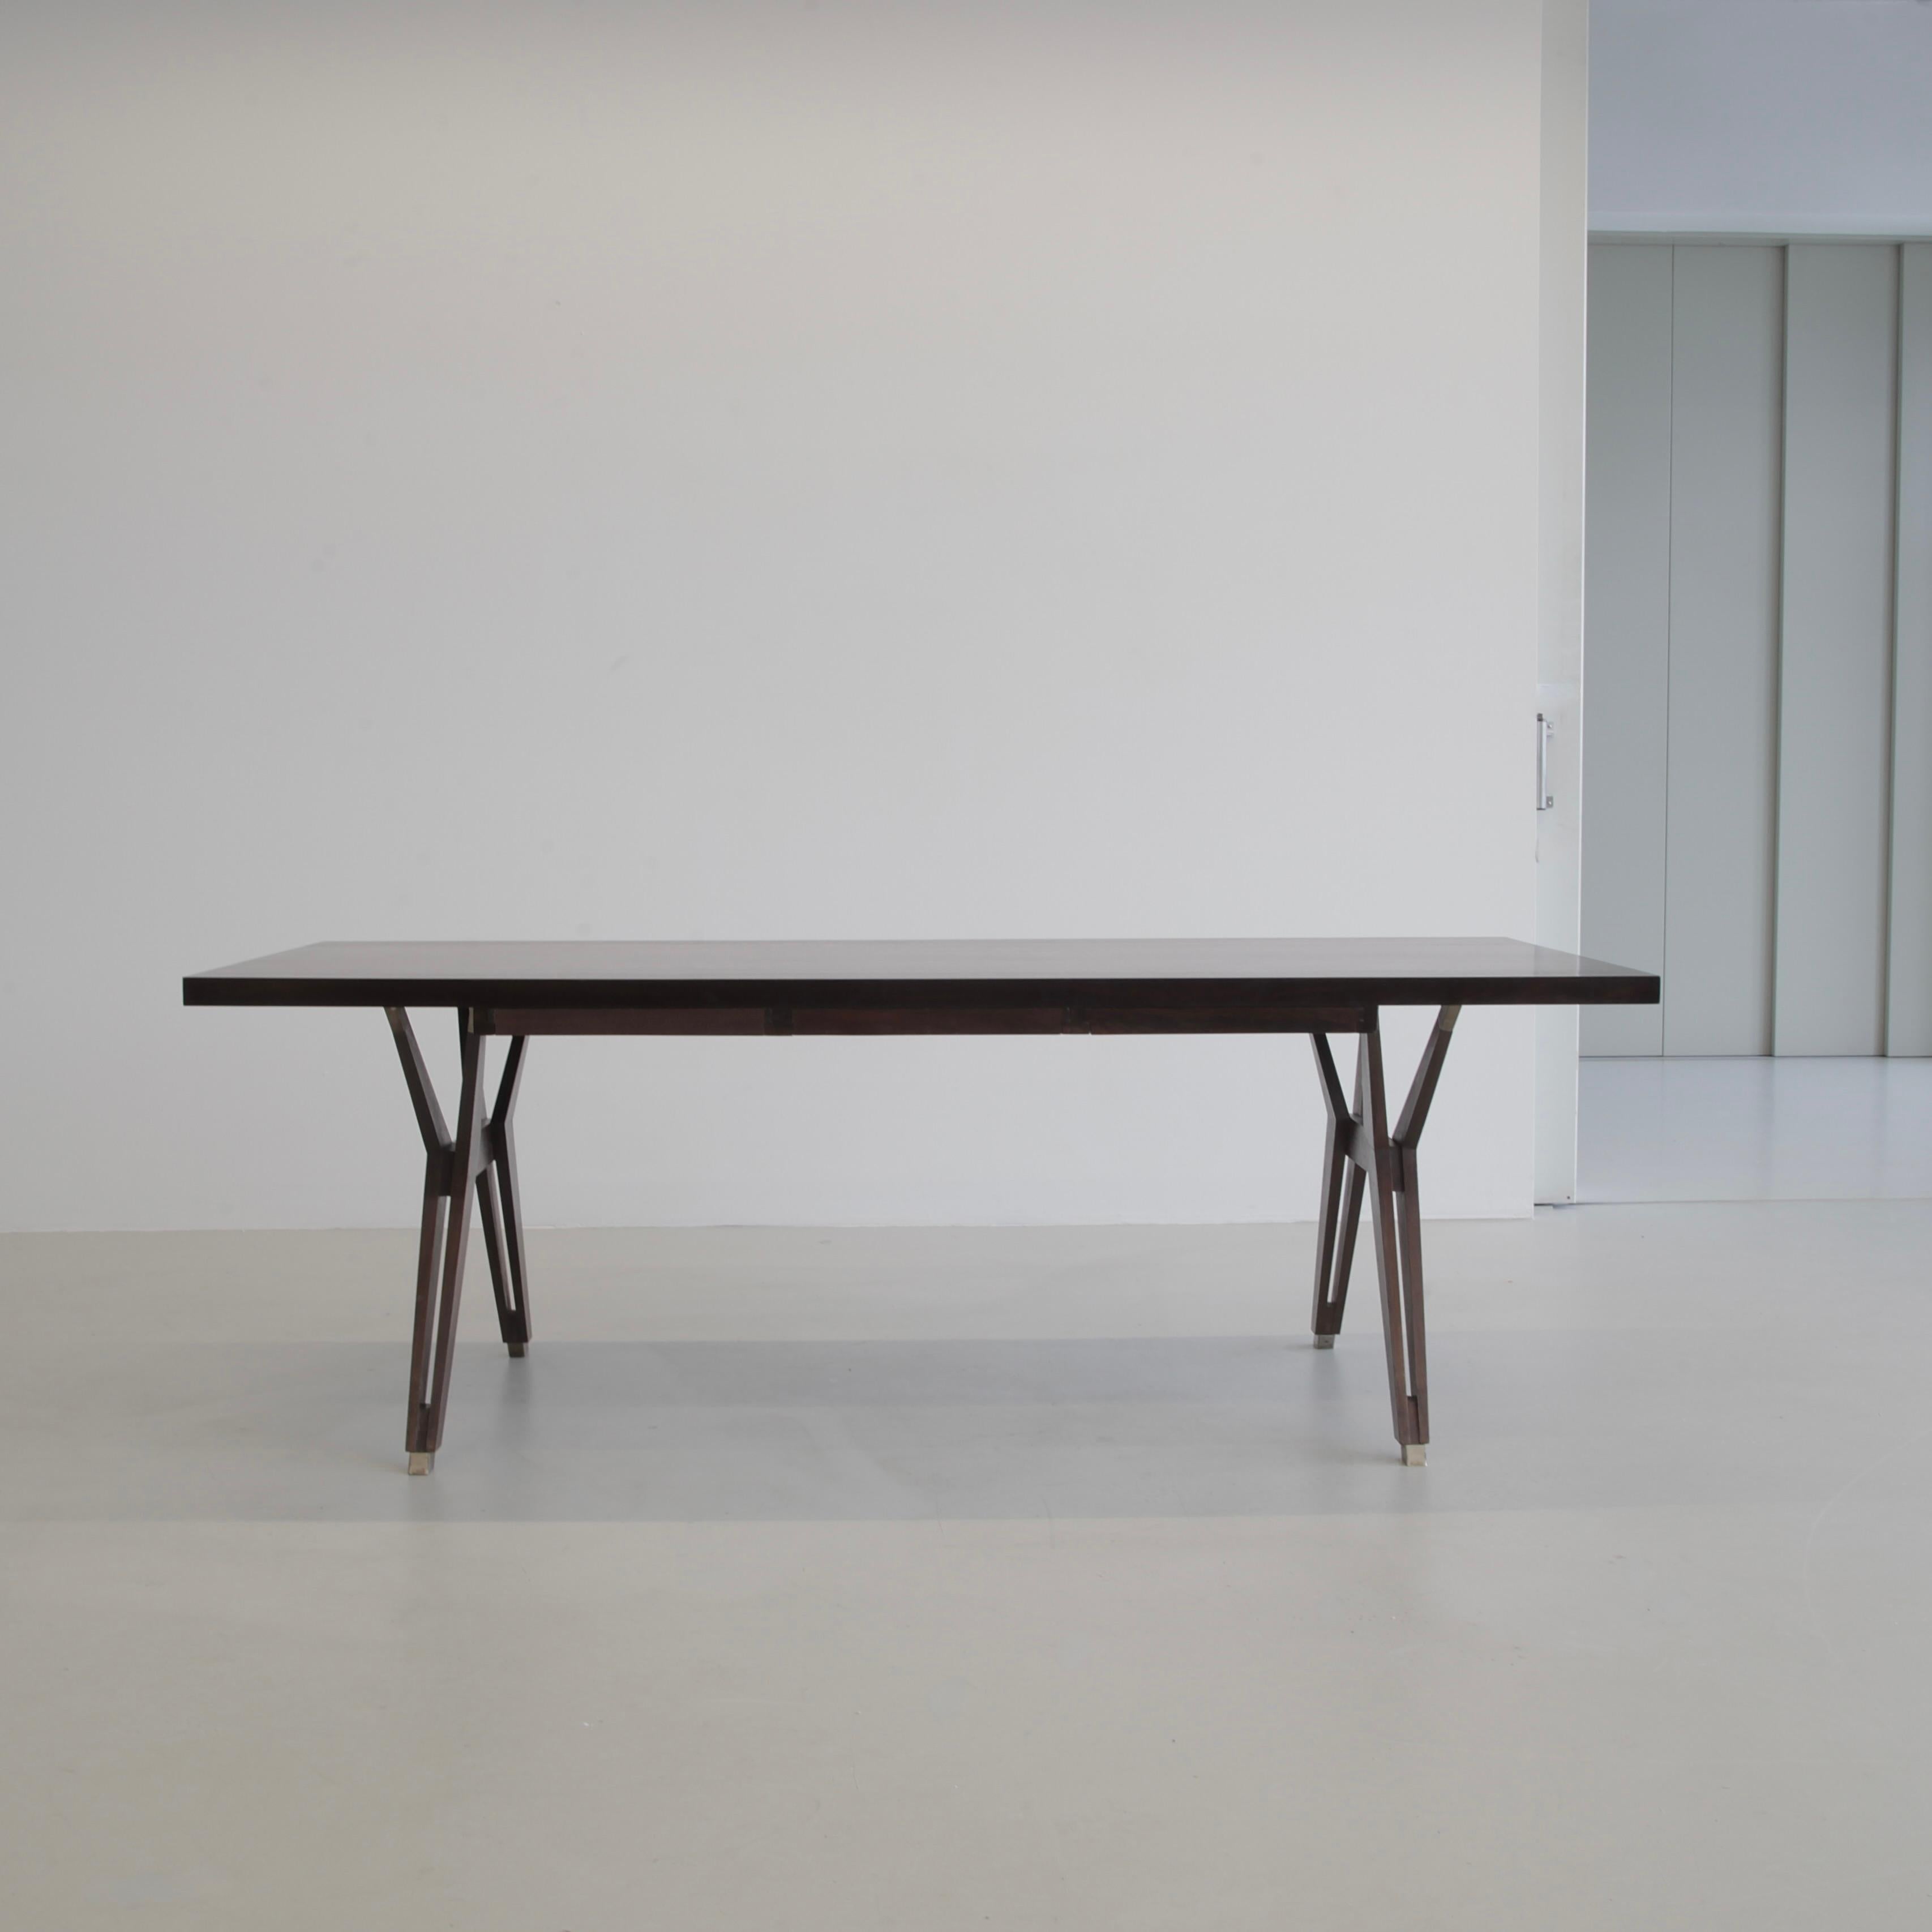 Table 'Terni', designed by Ico Parisi. Italy, MIM Roma, 1958.

The wooden table/ desk design by Parisi with an elegant dark wood grain top and three slim wooden drawers can be accessed from one side (these can be removed). Typical Ico Parisi solid